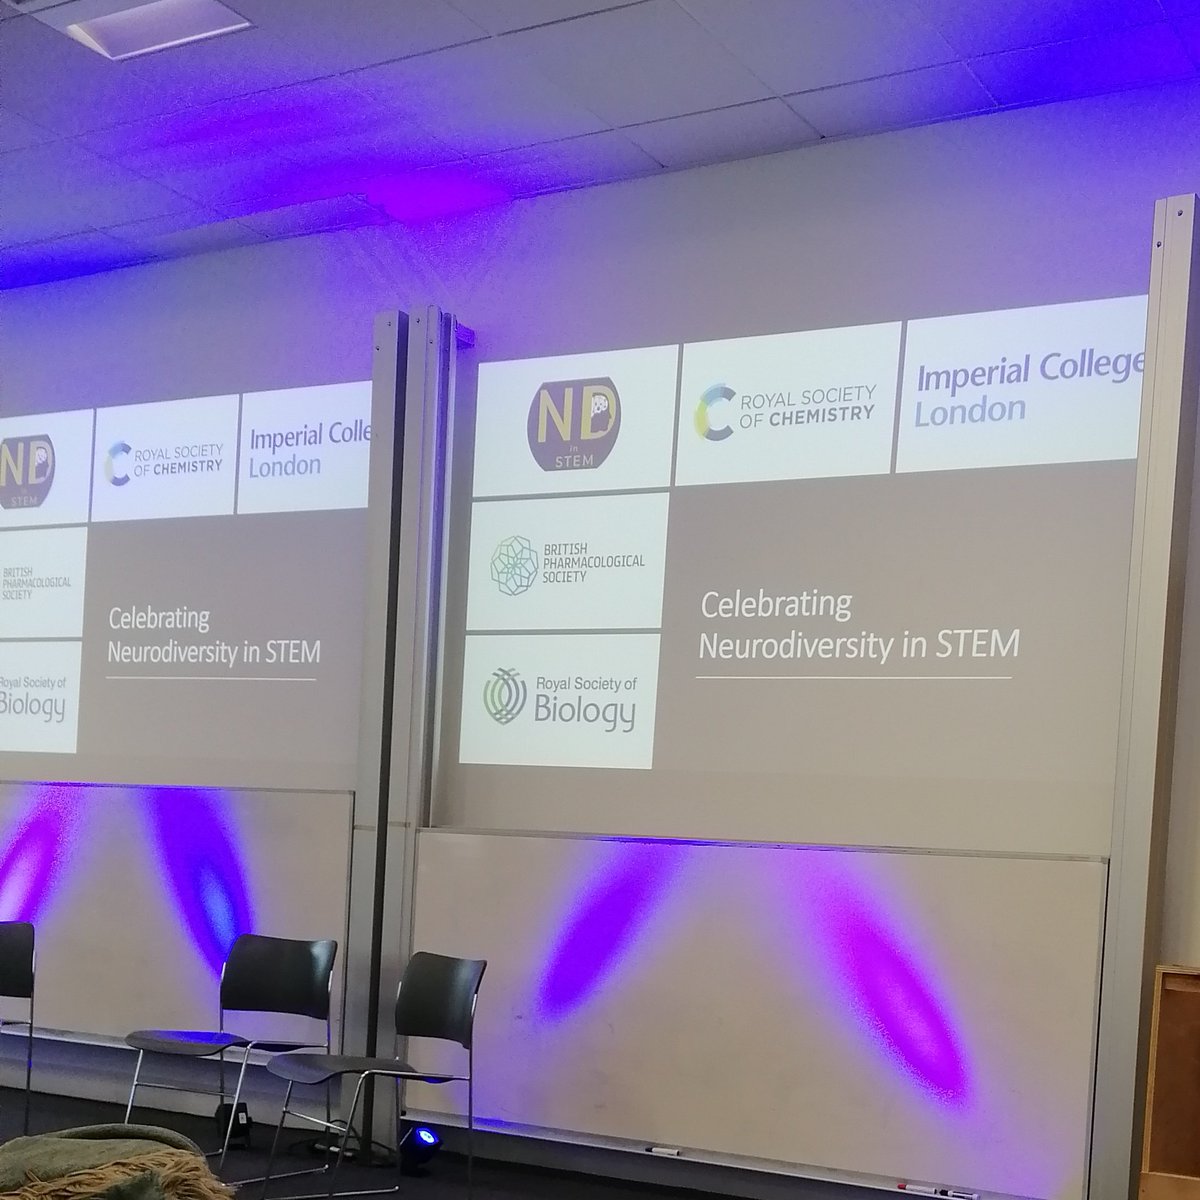 Such a great event today at Imperial College! Thanks @RankinProf for organizing this and inviting me. I was so inspired by the speakers and other panelists #NeurodivergentInSTEM #NDinSTEM